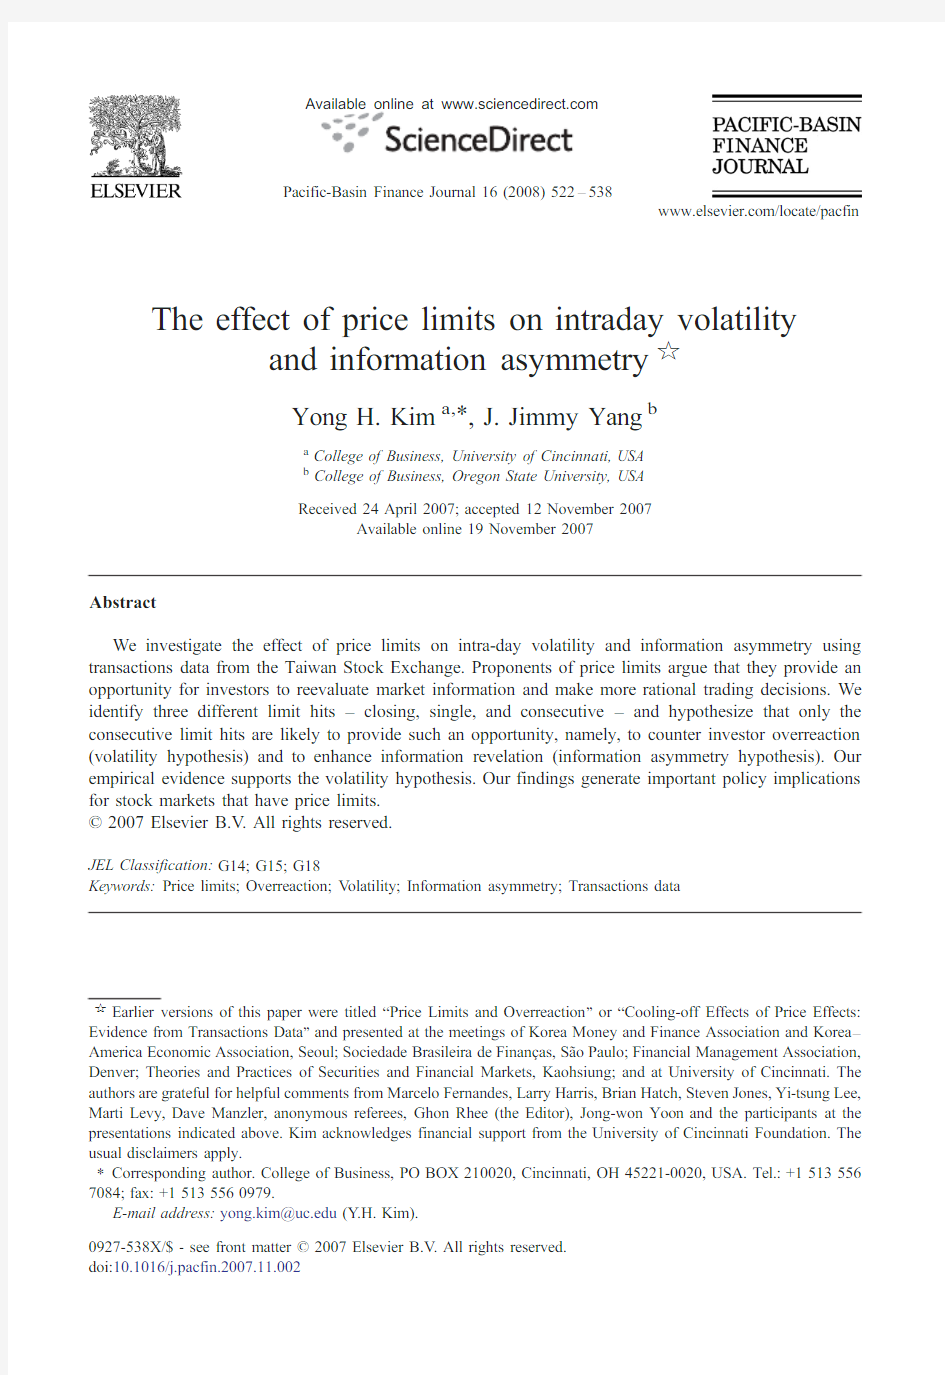 the effect of price limits on intraday volatility and information asymmetry